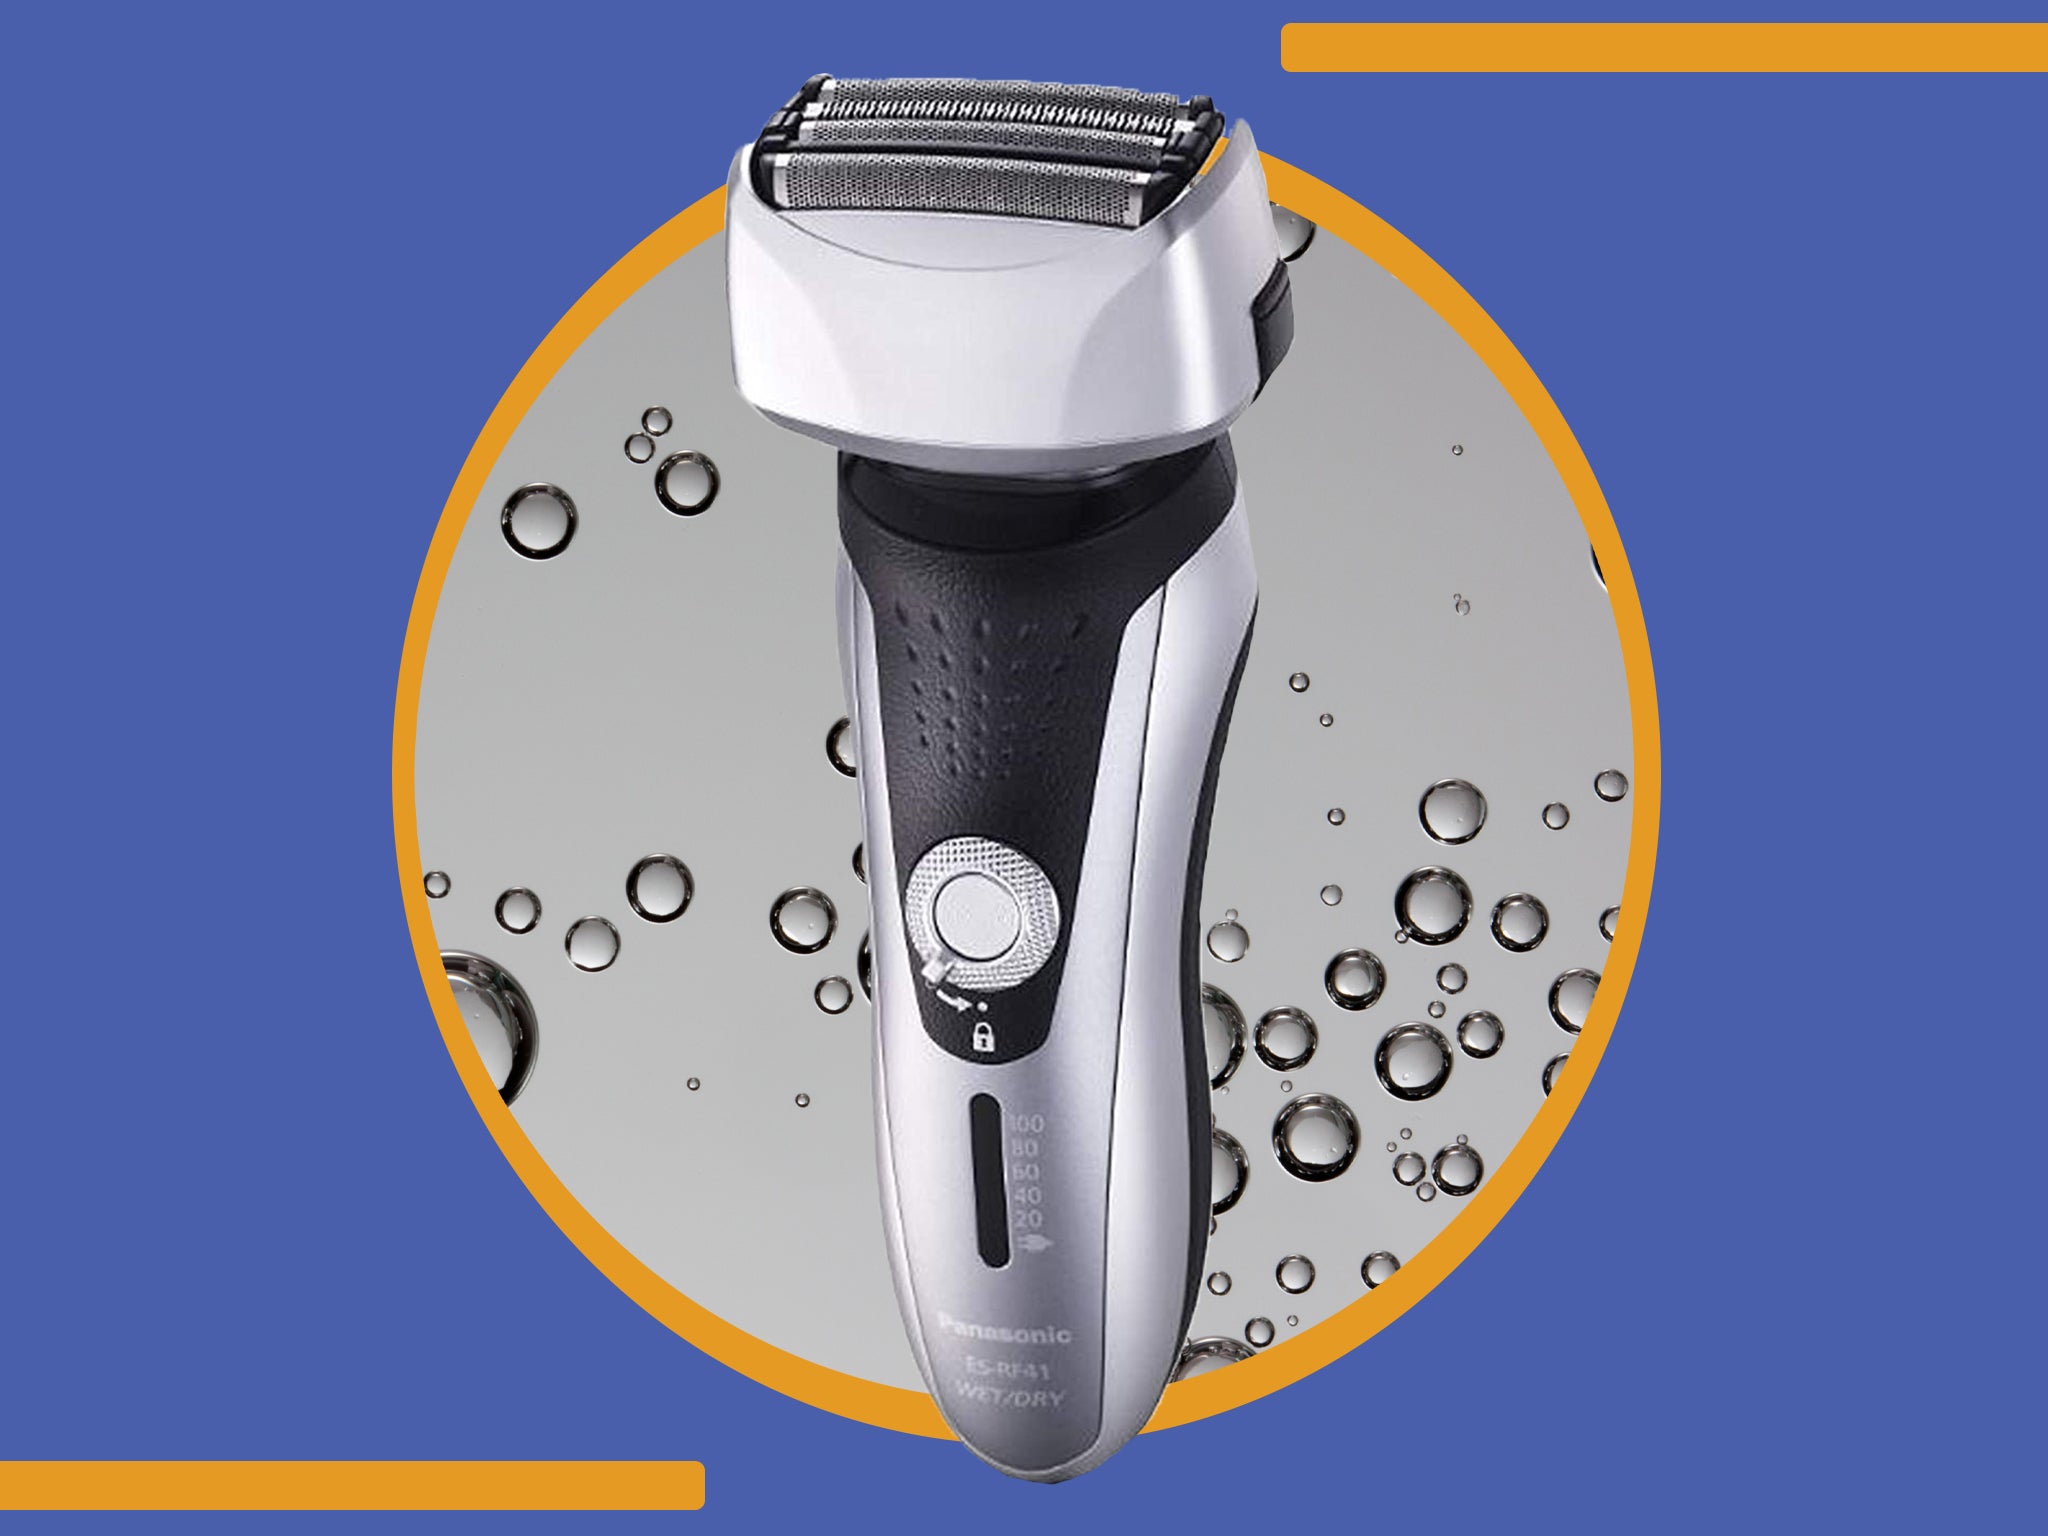 There’s 66 per cent off this wet and dry shaver from Panasonic